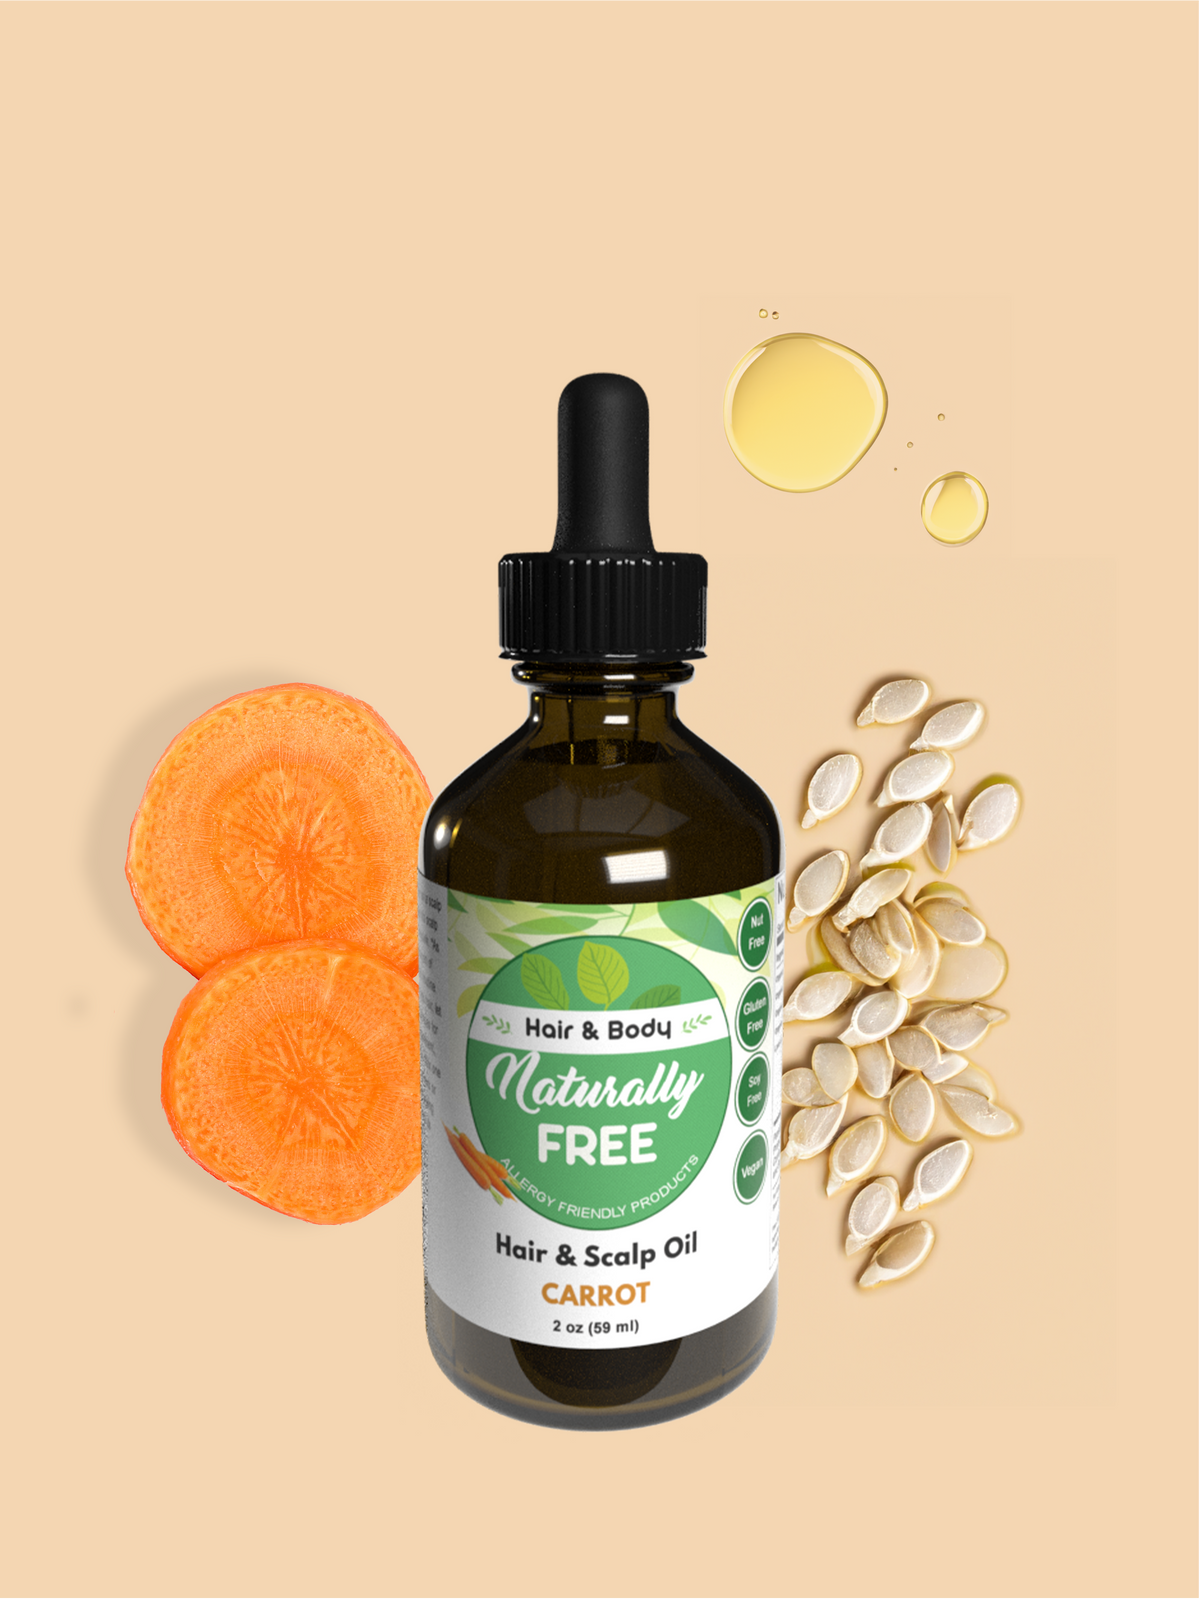 Carrot Hair & Scalp Growth Oil | Hypoallergenic - Allergy Friendly - Naturally Free